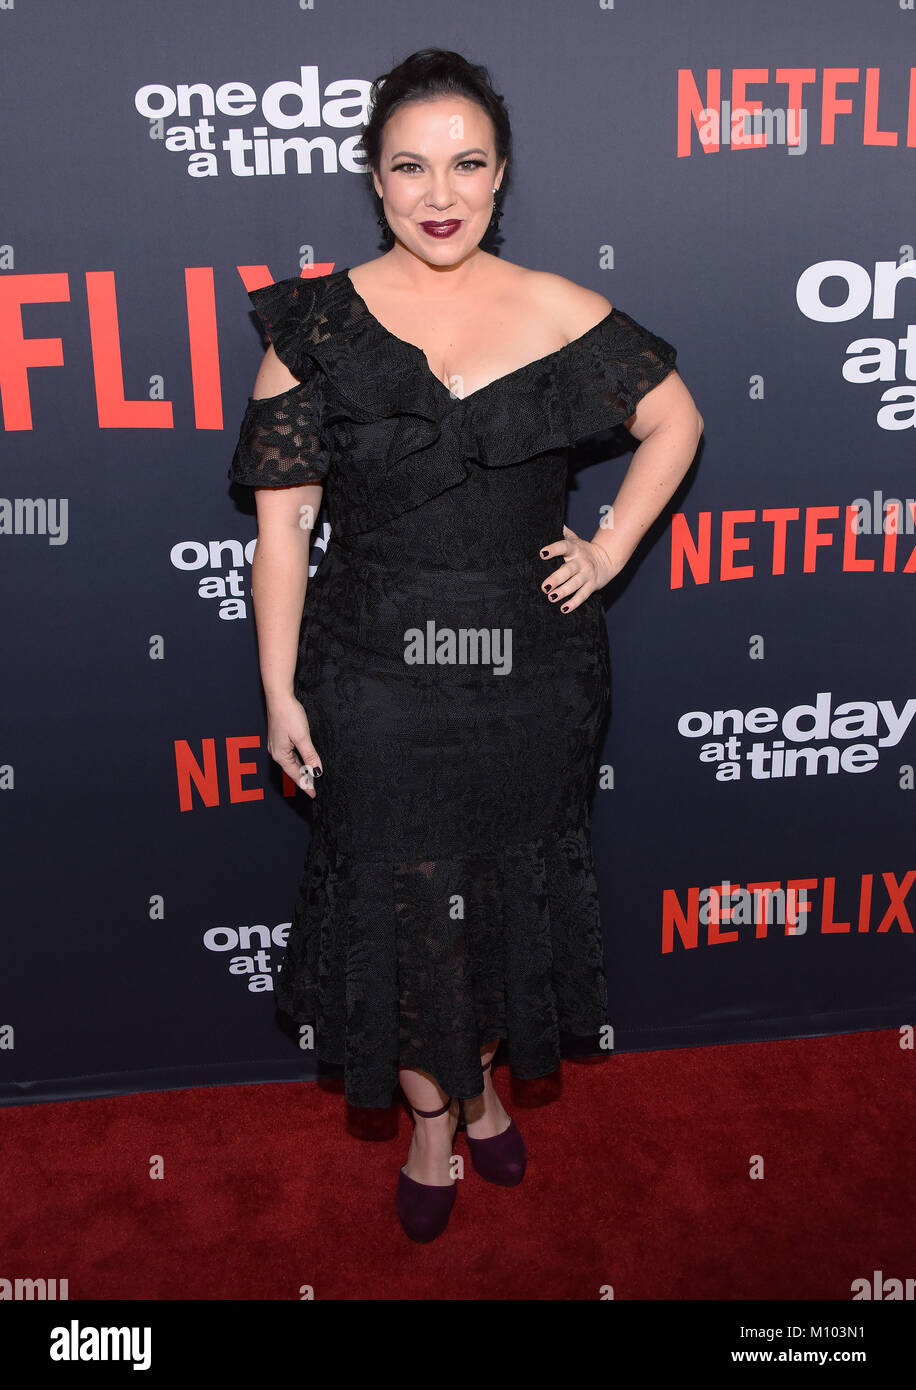 Hollywood, California, USA. 24th Jan, 2018. Gloria Calderon Kellett arrives for the premiere of the Netflix's 'One Day At A Time' Season 2 at the Arclight Cinema. Credit: Lisa O'Connor/ZUMA Wire/Alamy Live News Stock Photo